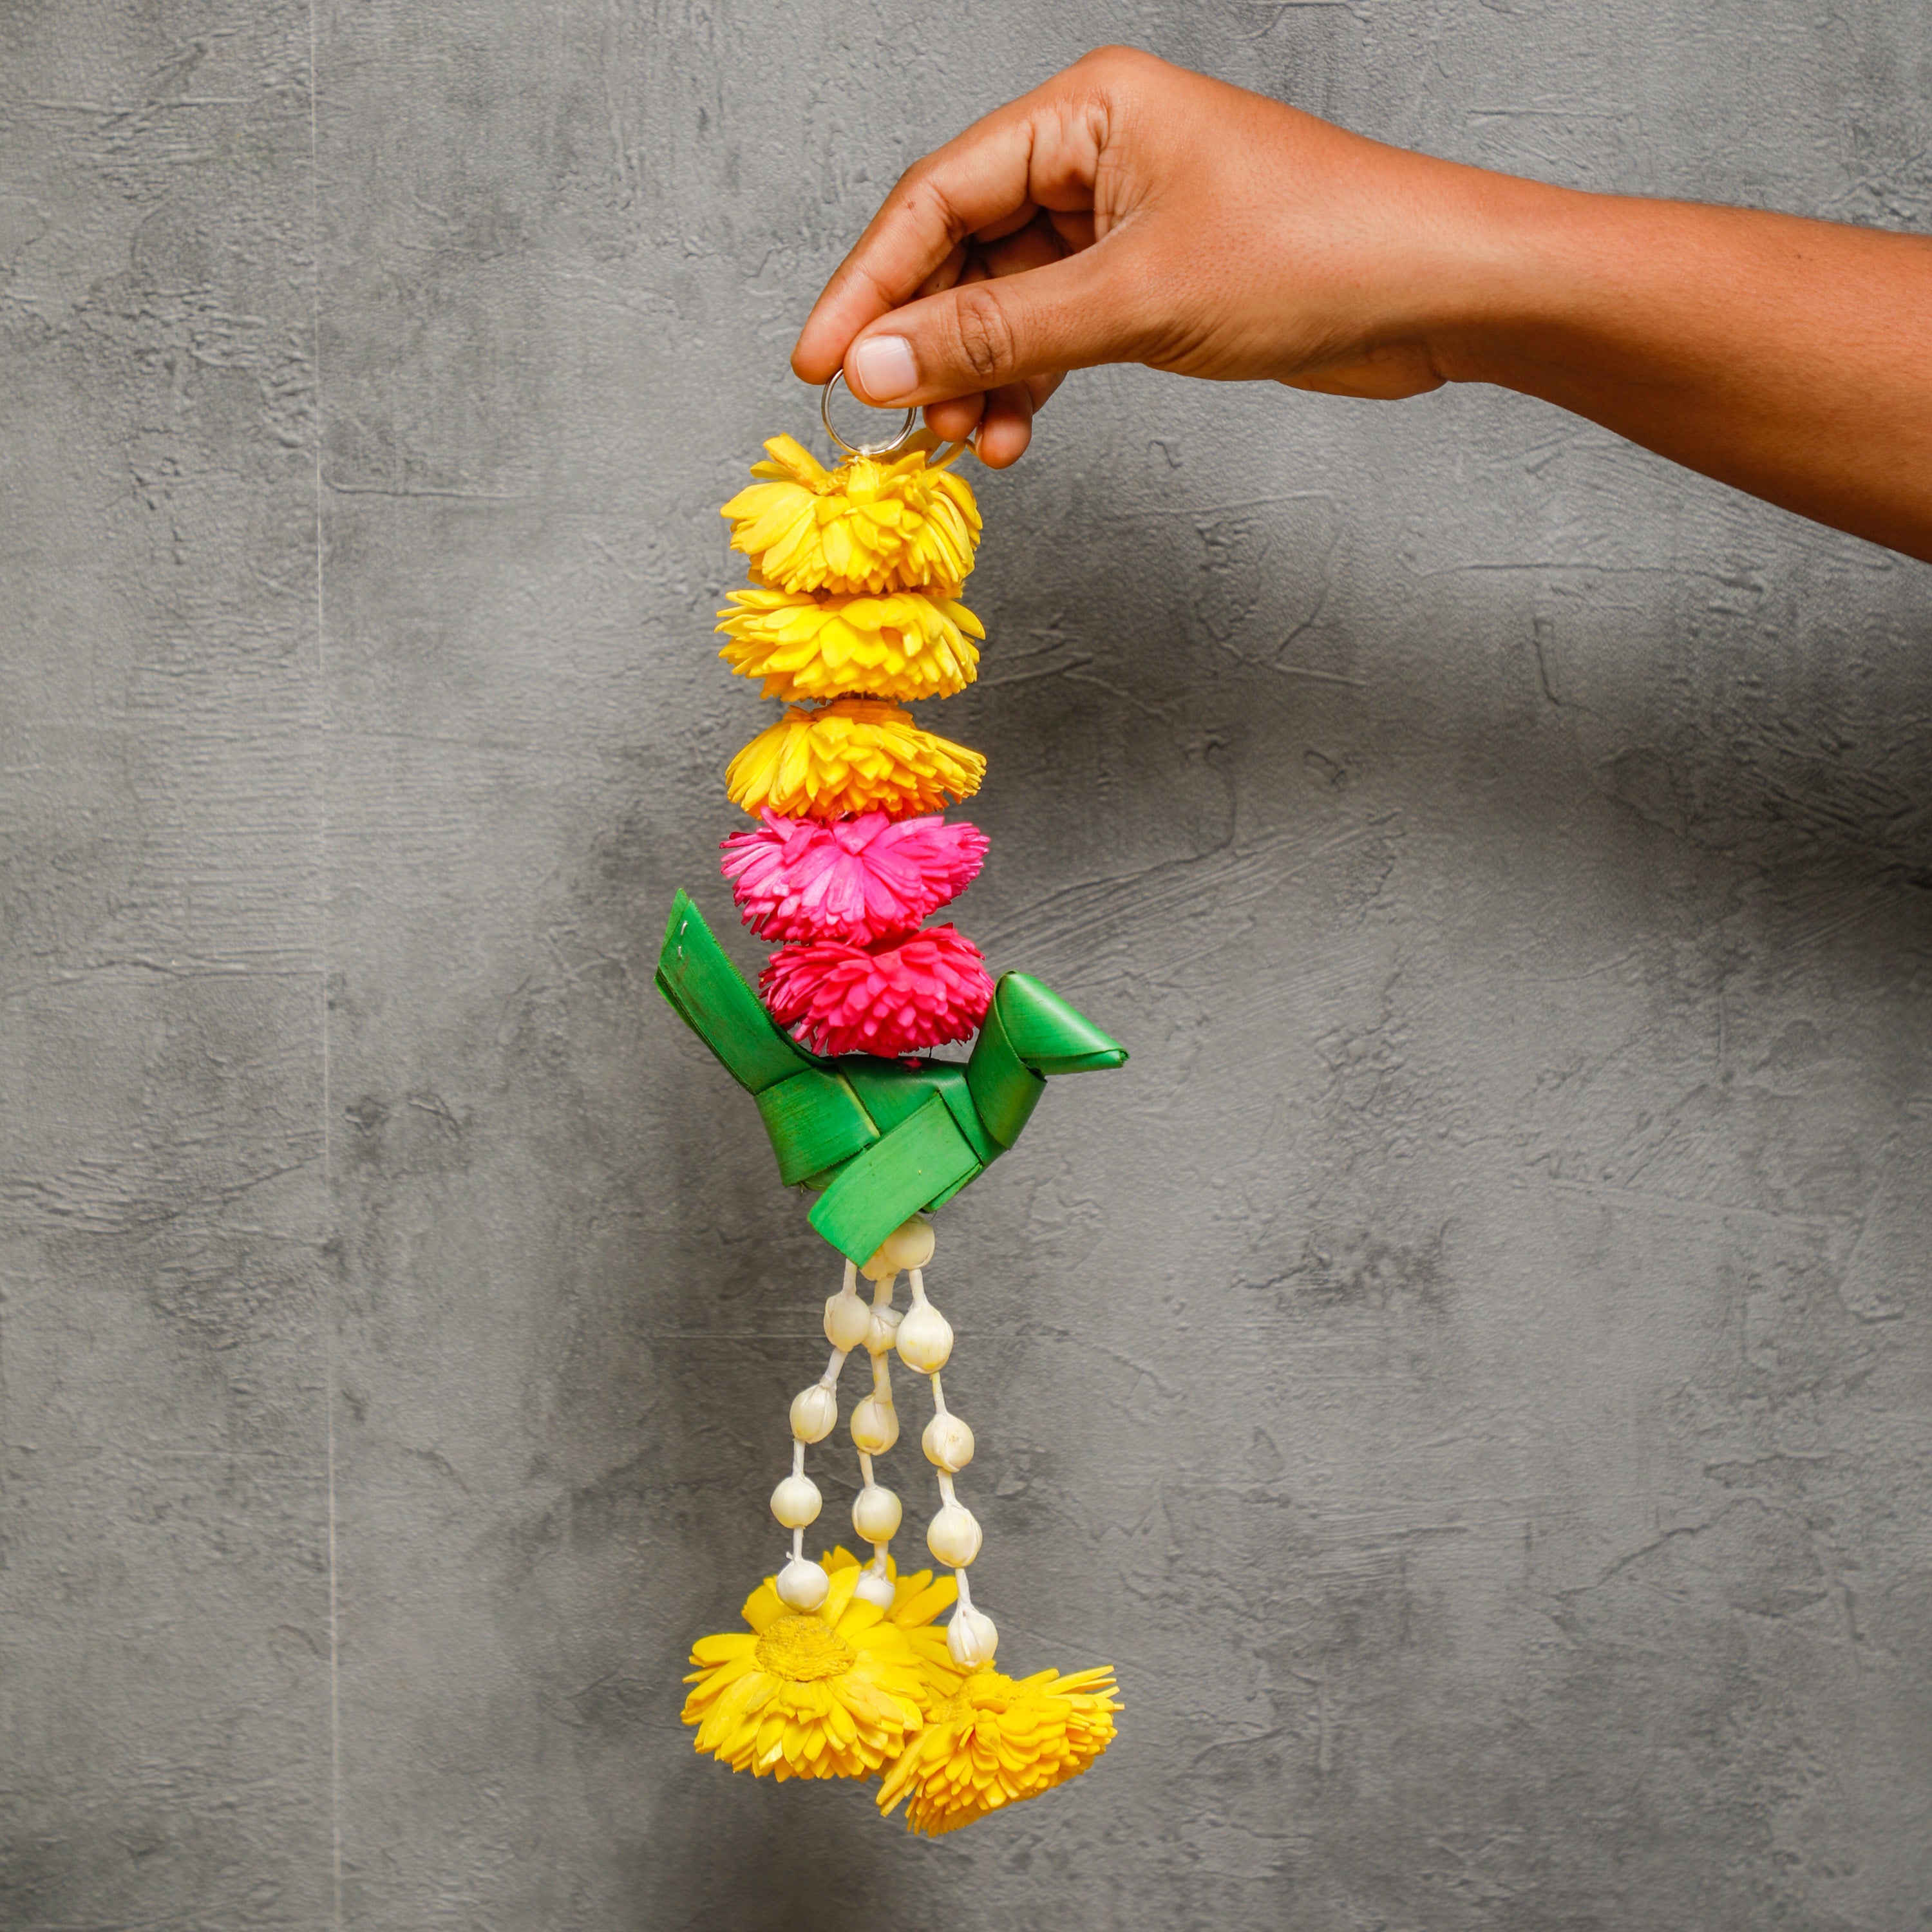 With its easy-to-use ring, hanging becomes effortless